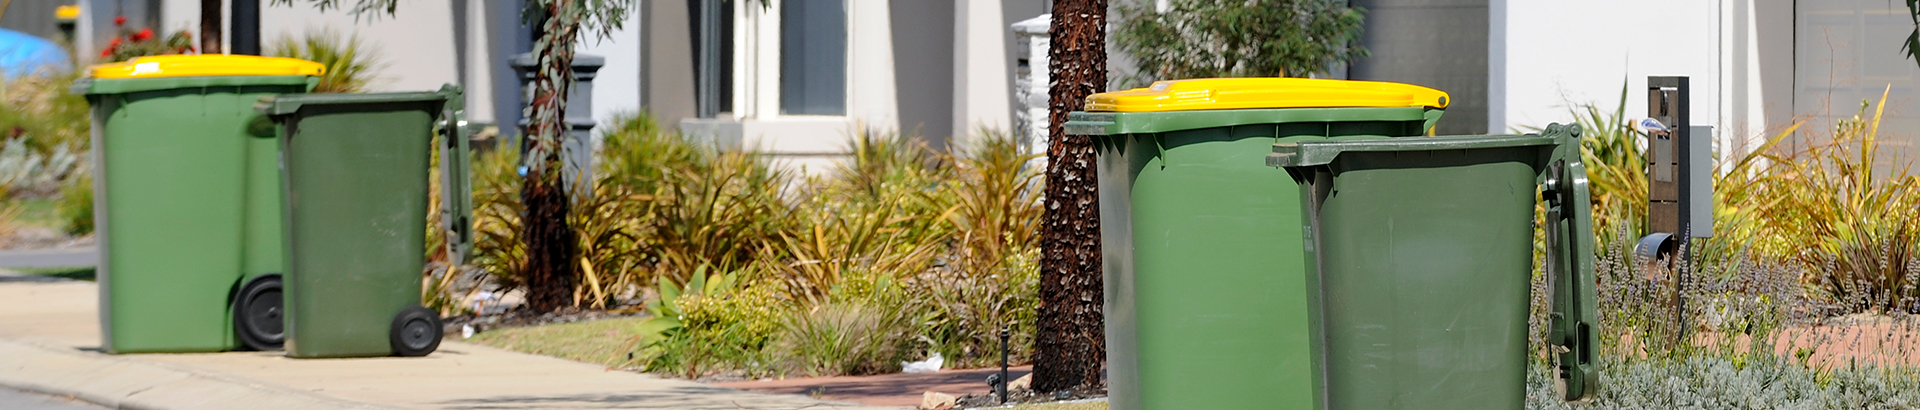 A residential street with green and yellow bins lined up after collection. 